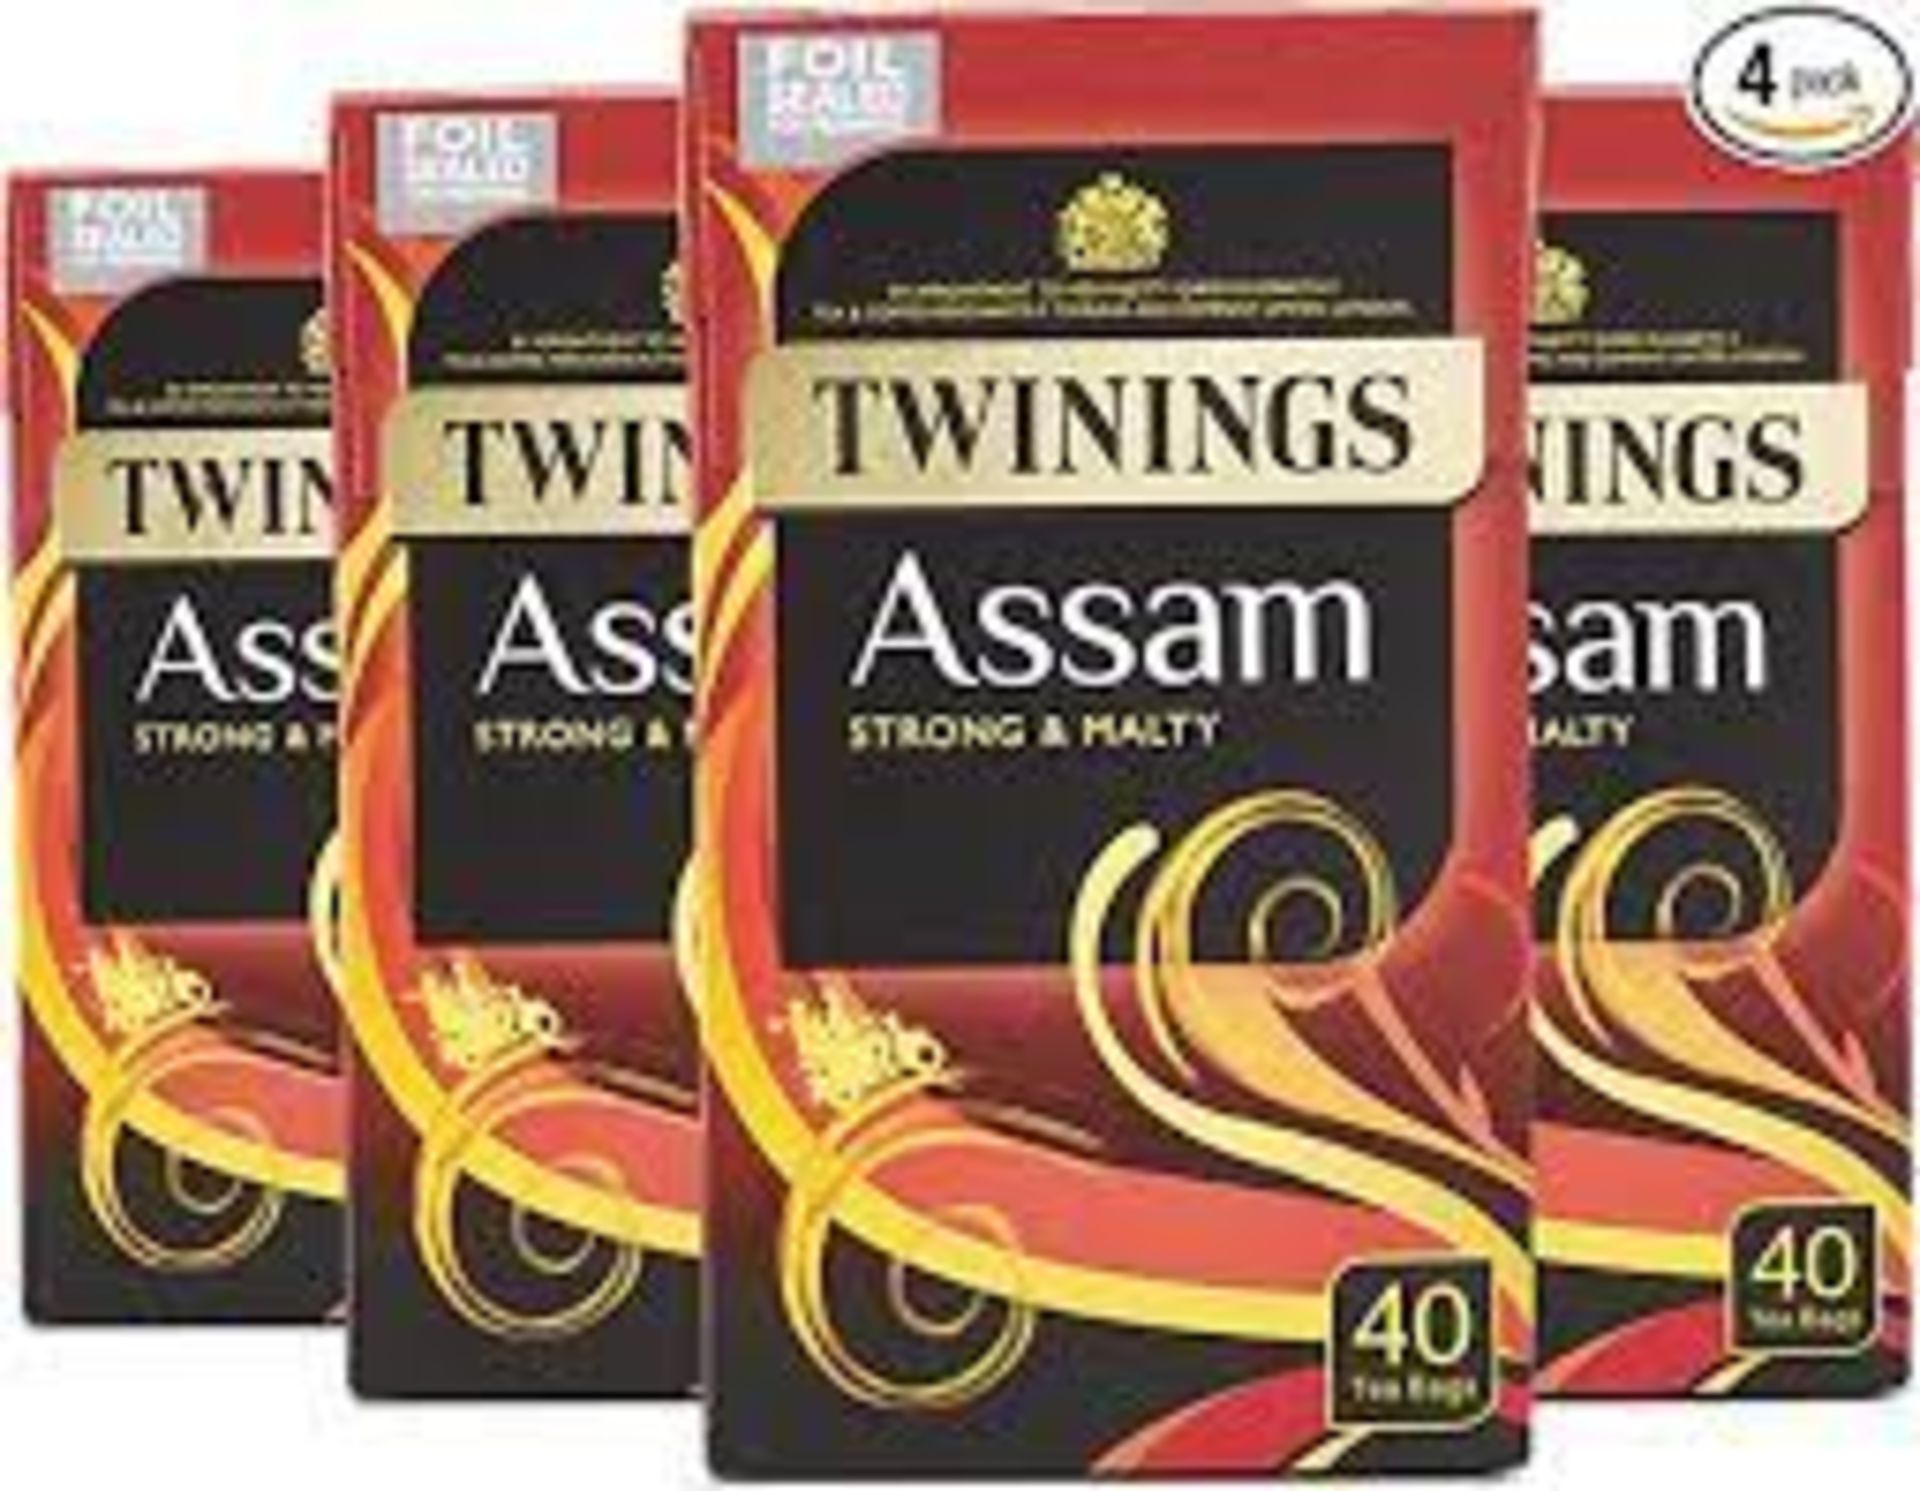 RRP £781 (Approx. Count 48) Spw0U06625Q (3) 1 x Twinings Assam Tea 160 Tea Bags (Multipack of 4 x 40 - Image 2 of 3